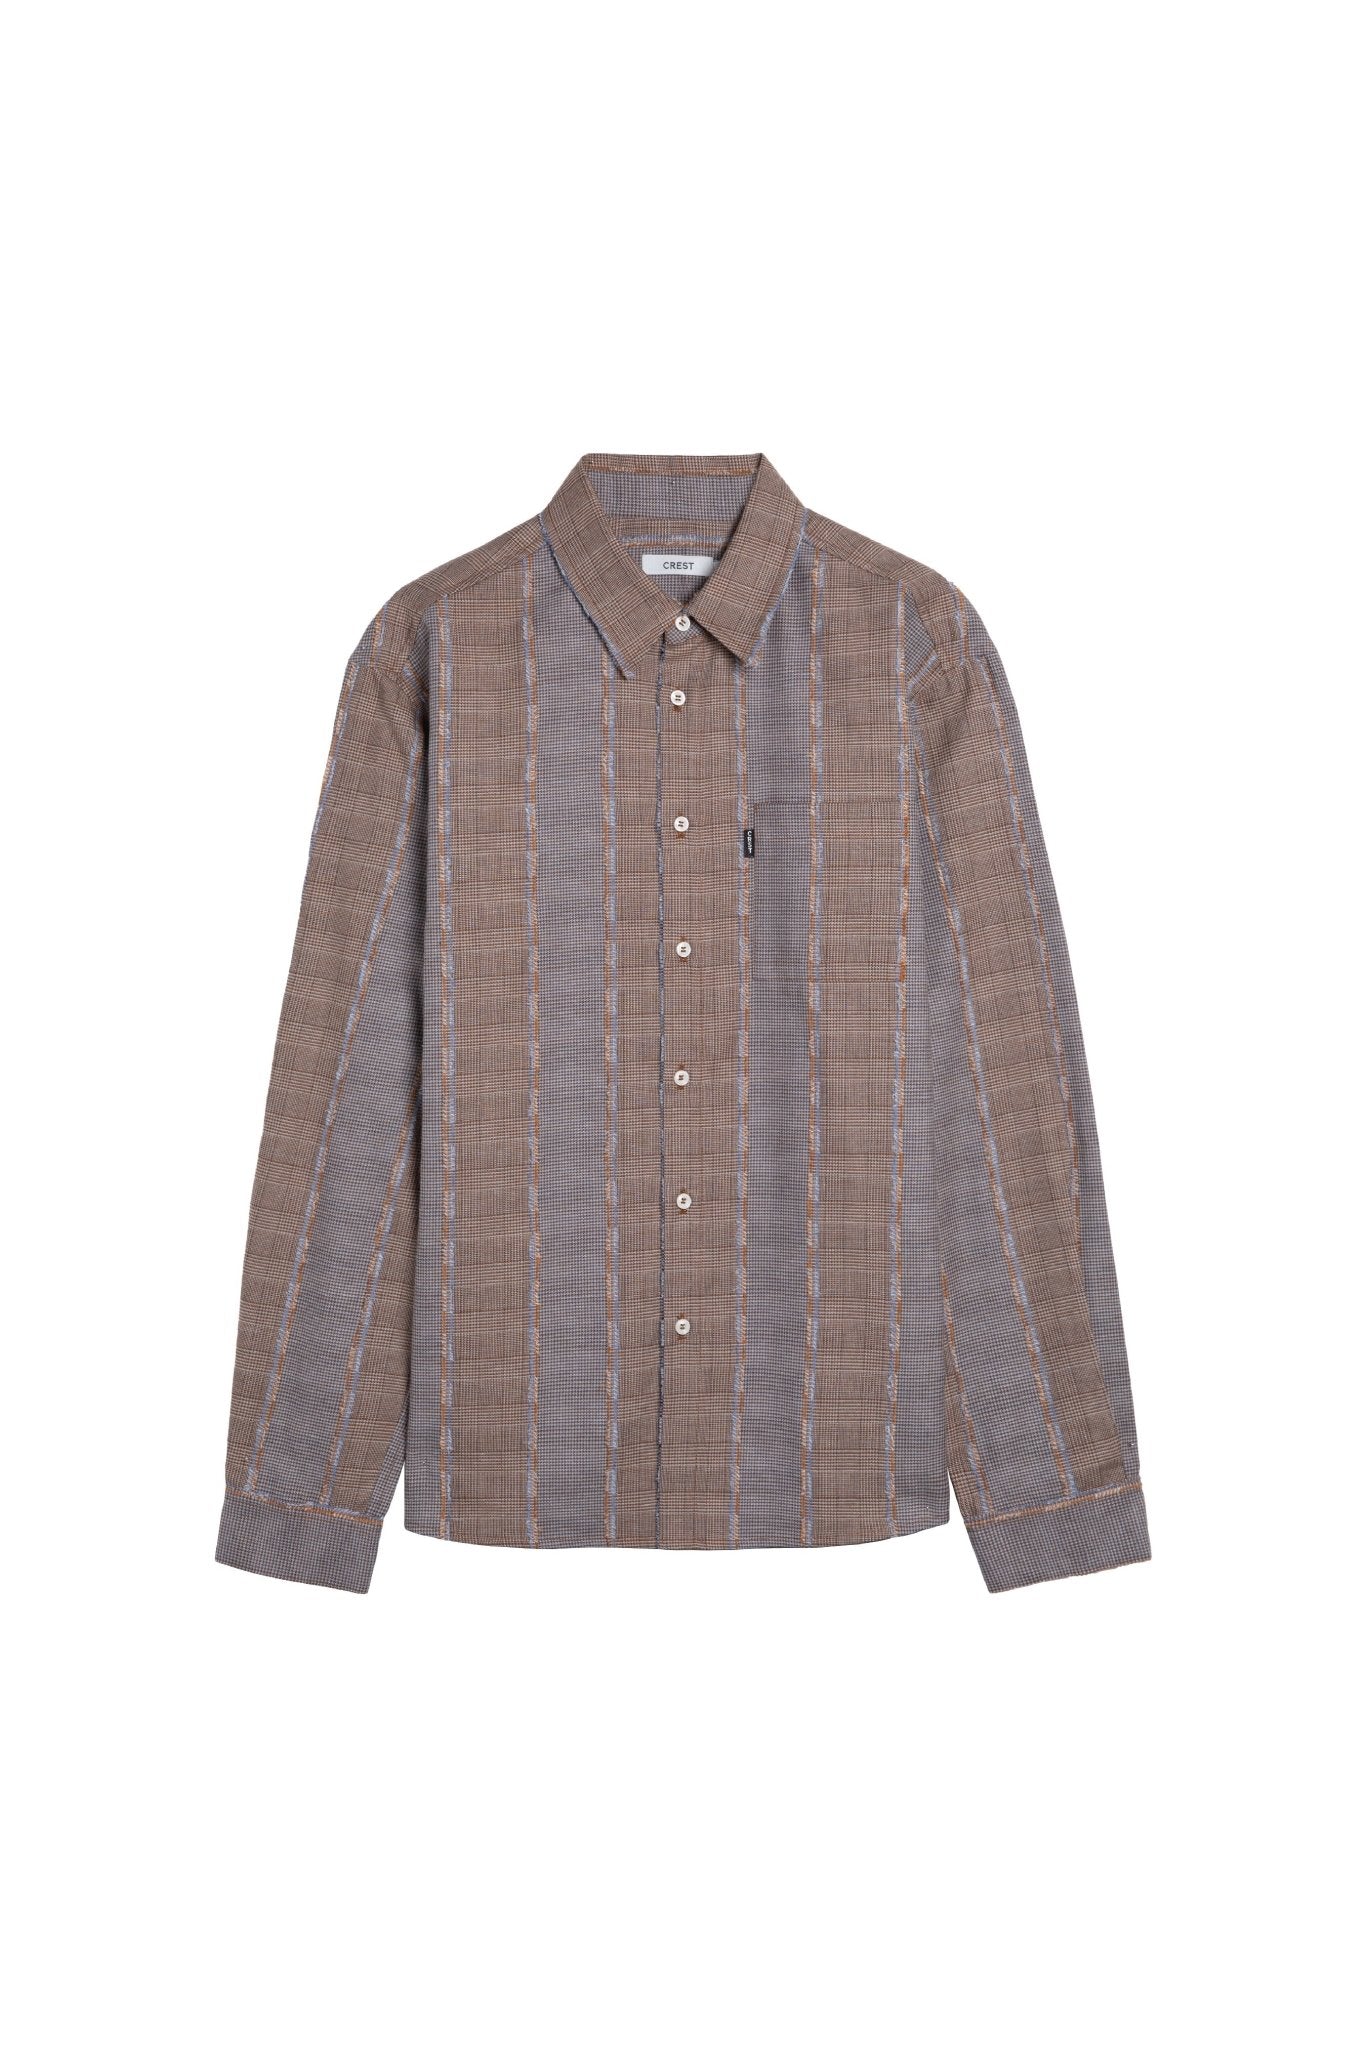 CREST - Reworked Houndstooth Long Sleeves Shirt